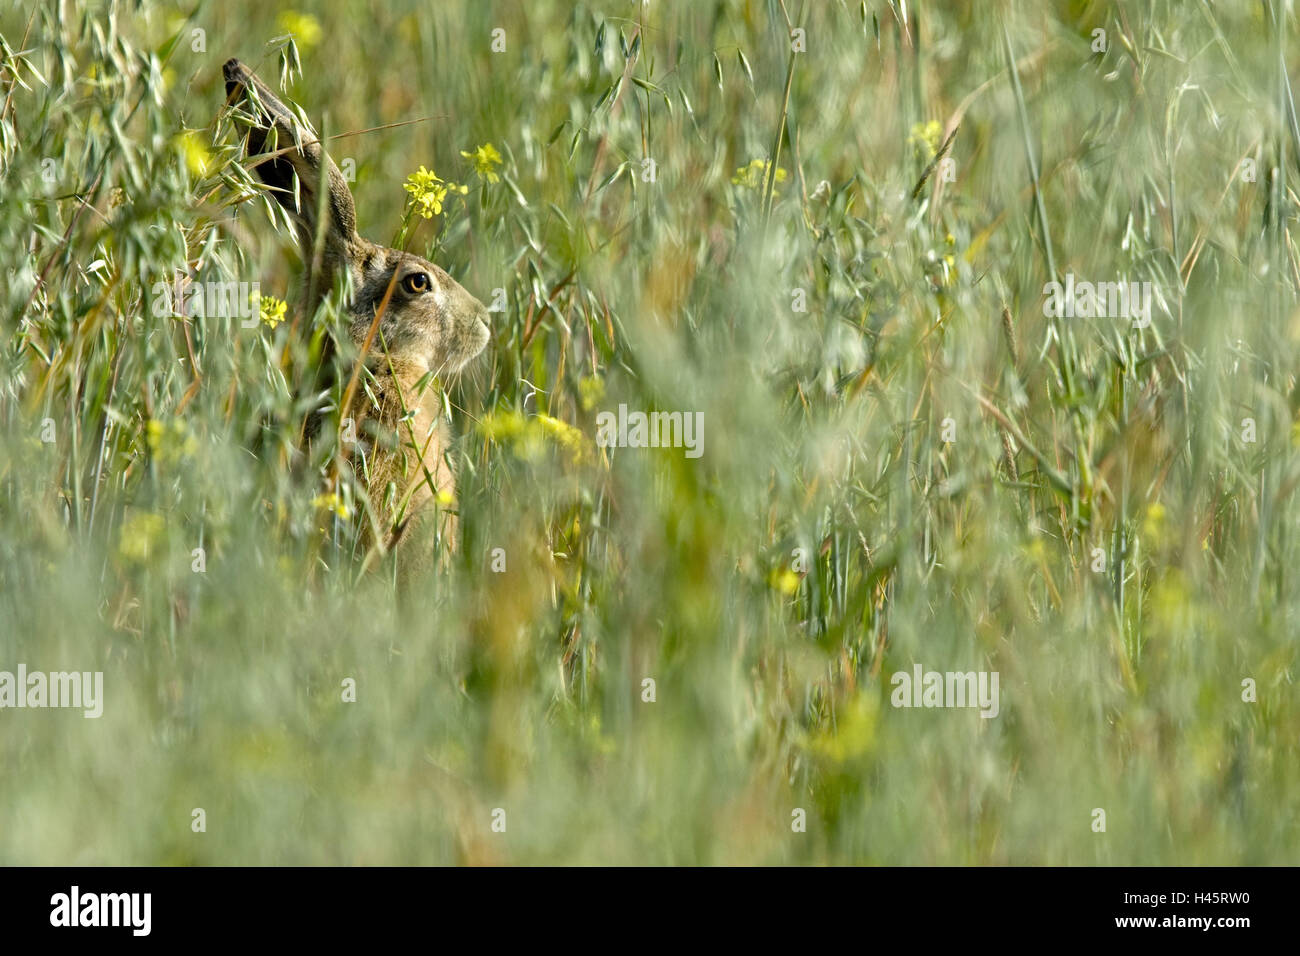 Grass, field hare, Lepus europaeus, sit, look out, mammal, animal, hare, hare-like, Leporidae, fur, brown, hare's ears, sit, hide, view, attention, tread, side view, flowers, nature, Stock Photo